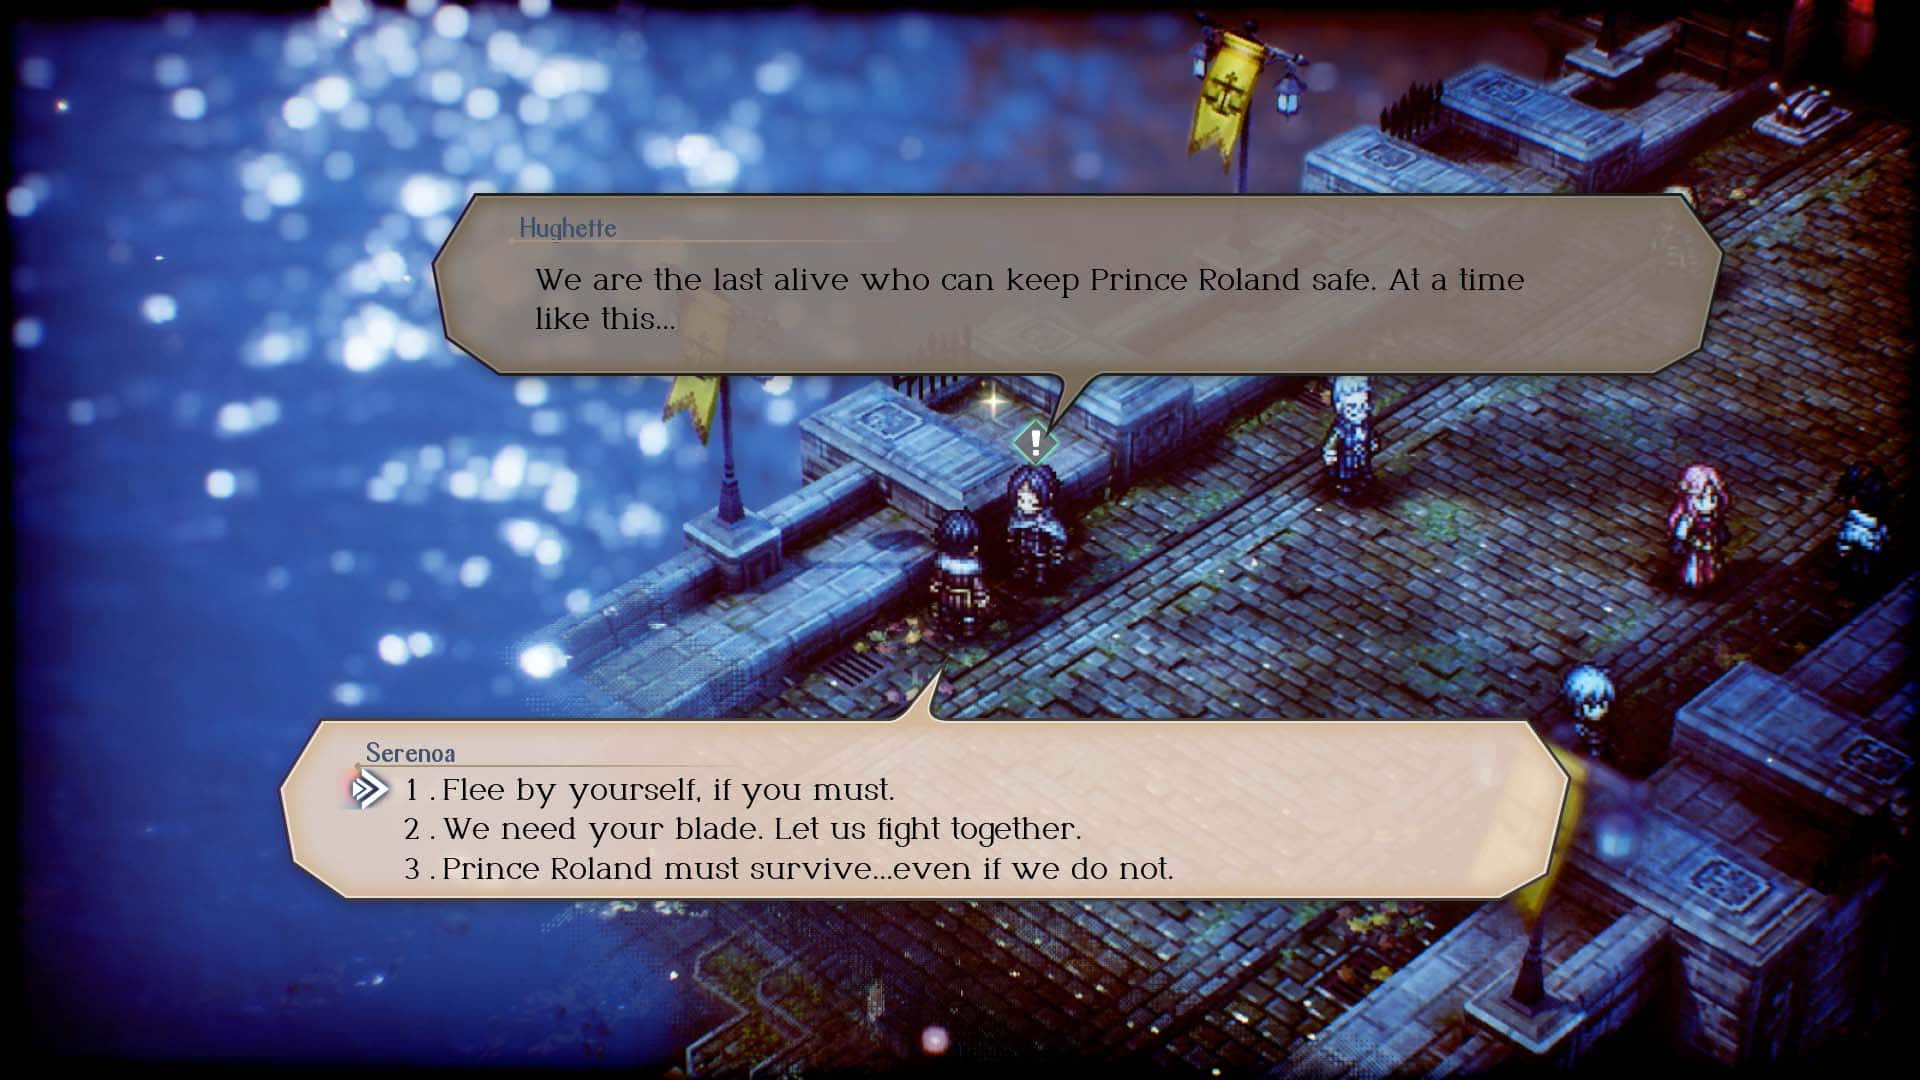 project triangle strategy octopath